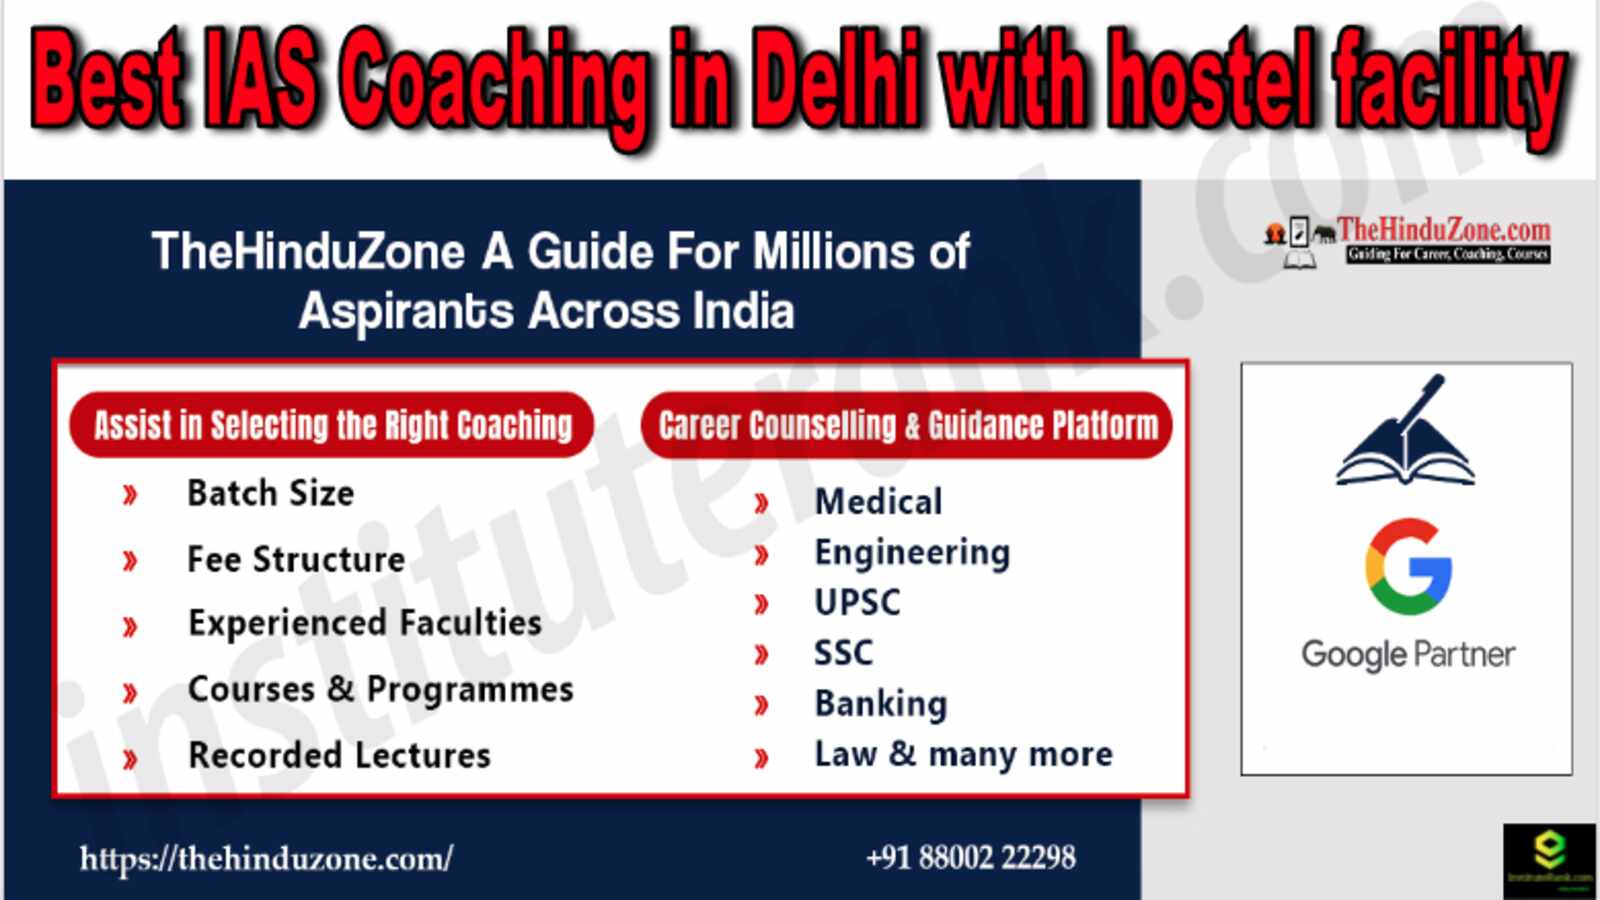 IAS Coaching in Delhi with hostel facility